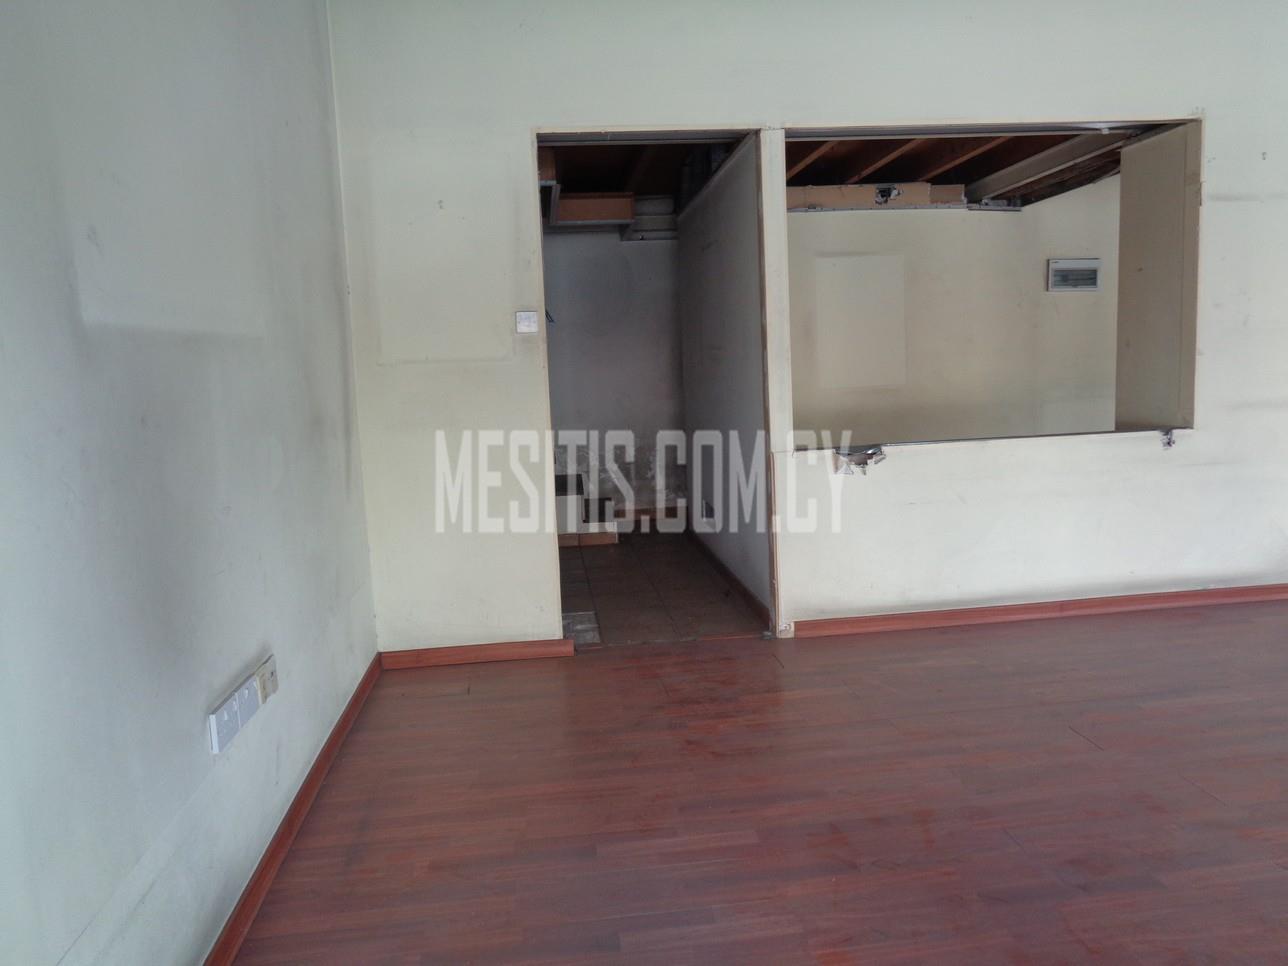 Shop Of About 70 Sq.M. For Rent In Nicosia City Centre #3845-0